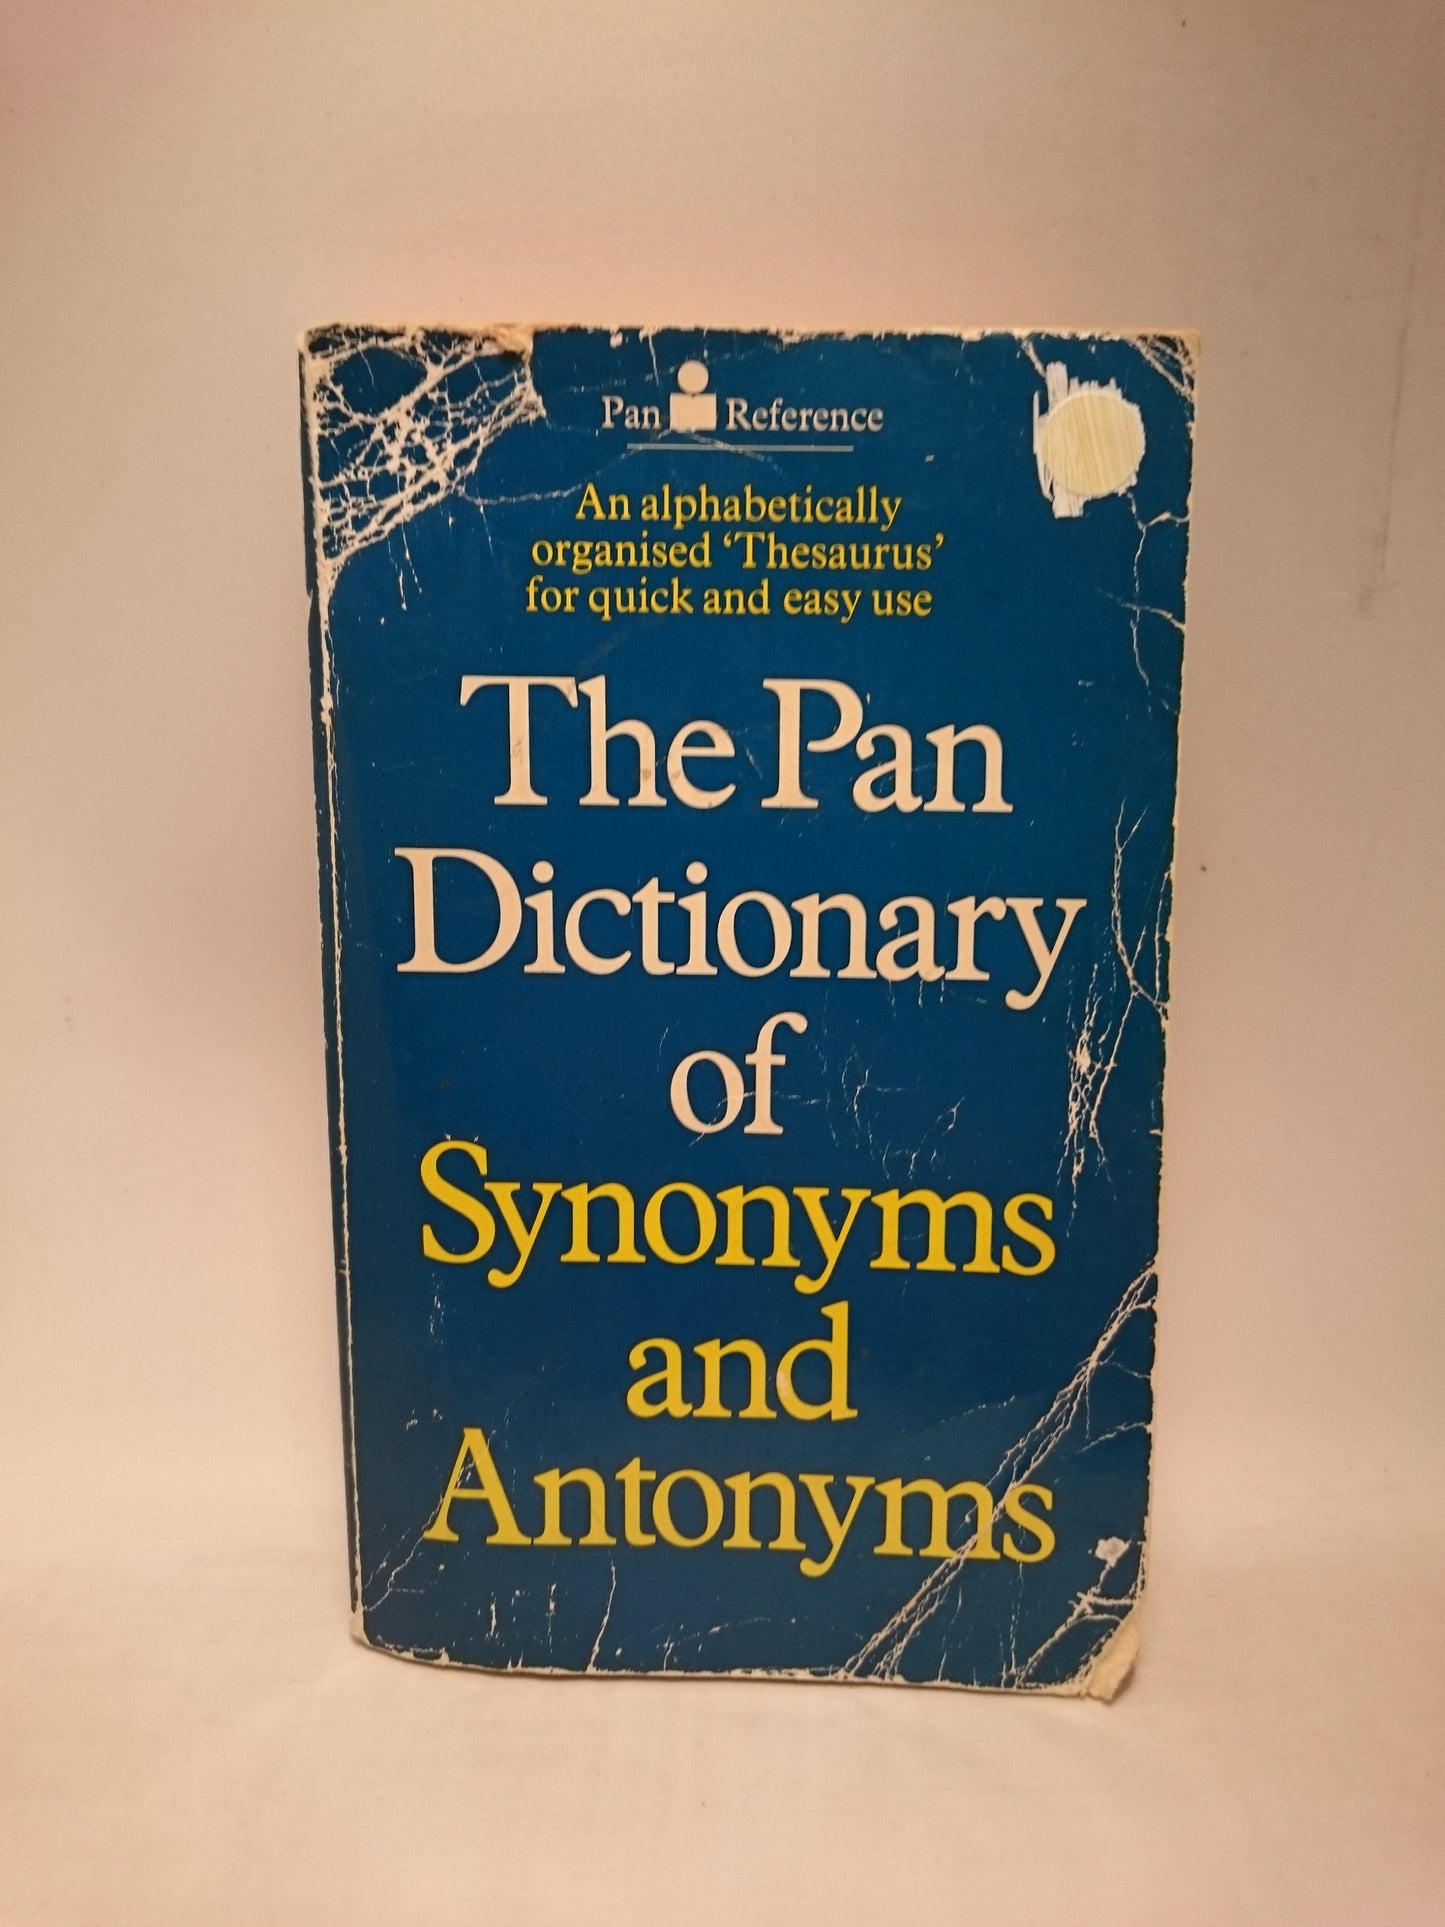 The Pan Dictionary of Synonyms and Antonyms